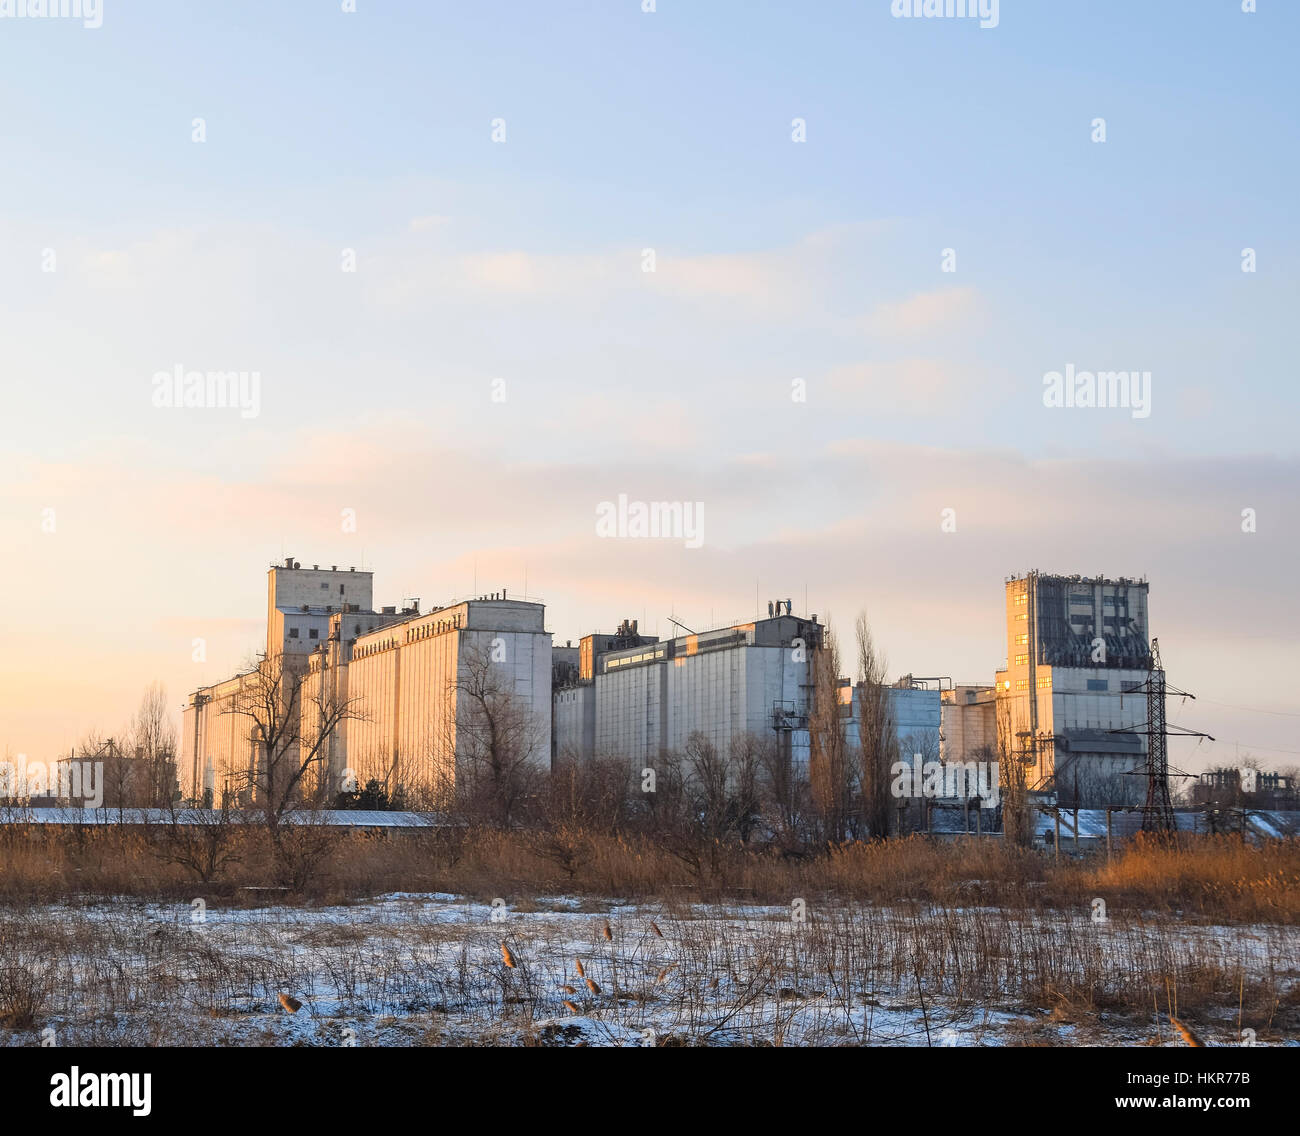 Building for storing and drying grain. Soviet-built elevator. Stock Photo